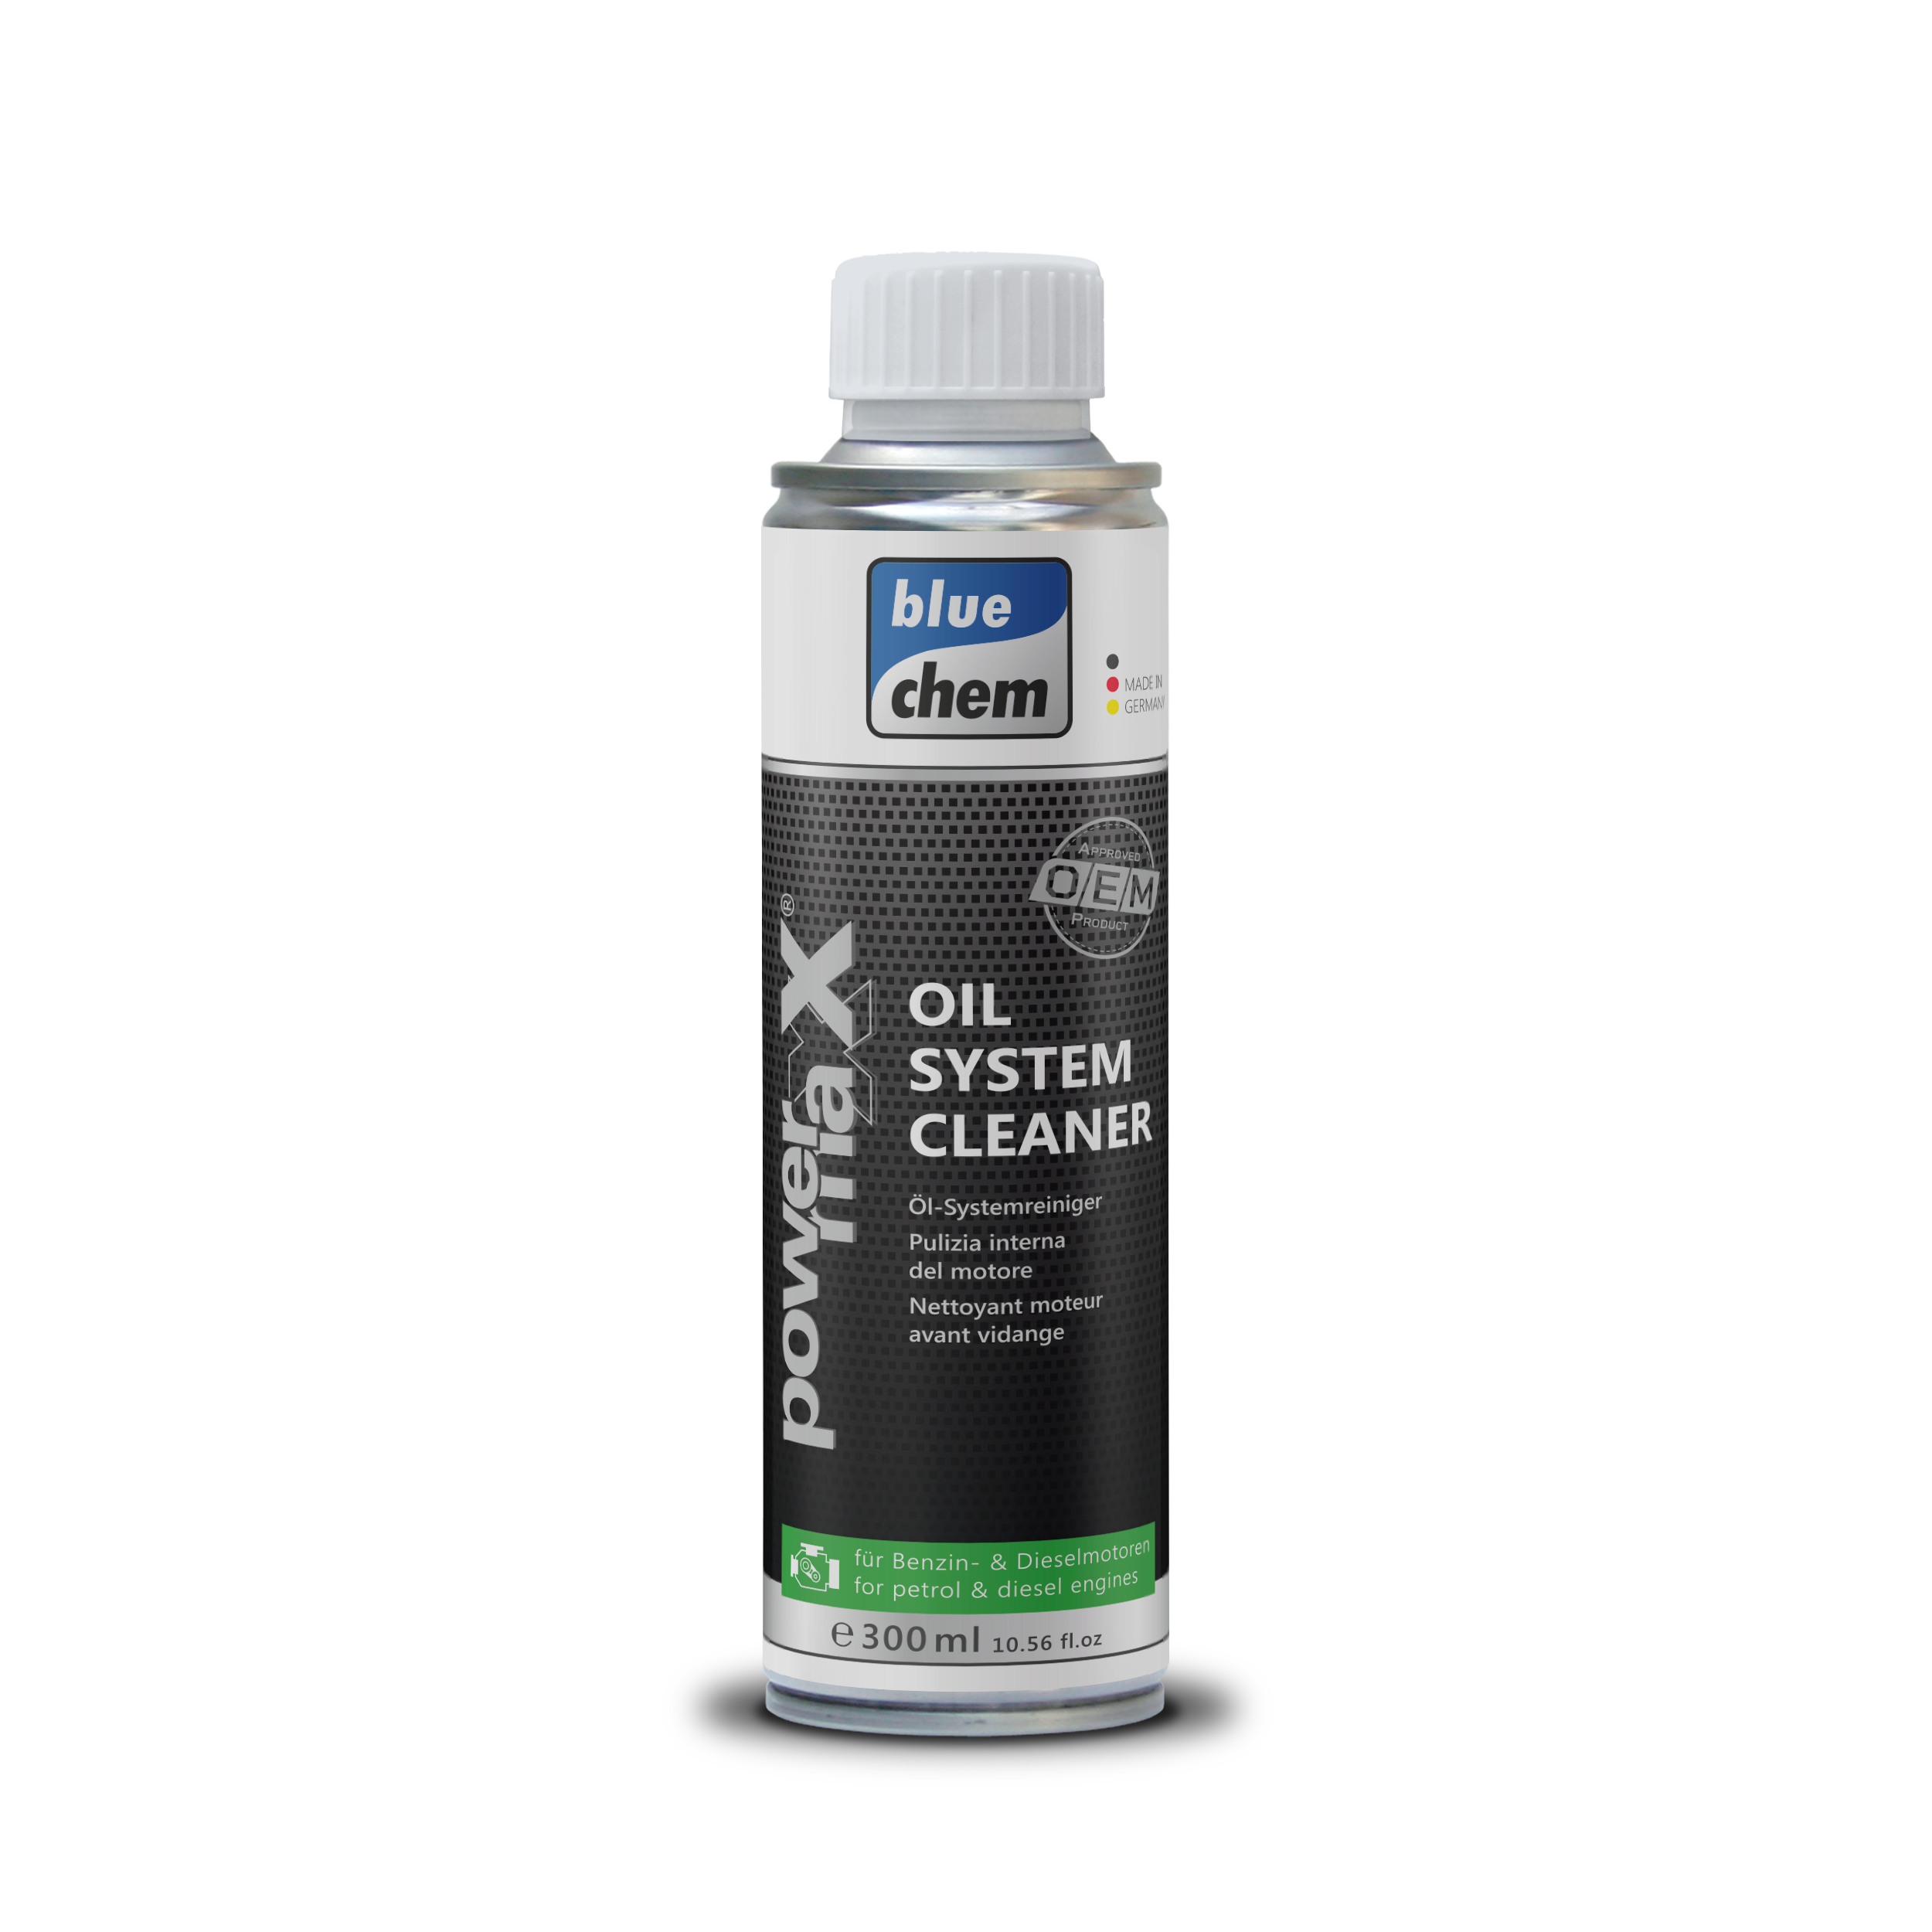 Oil System Cleaner - bluechemGROUP